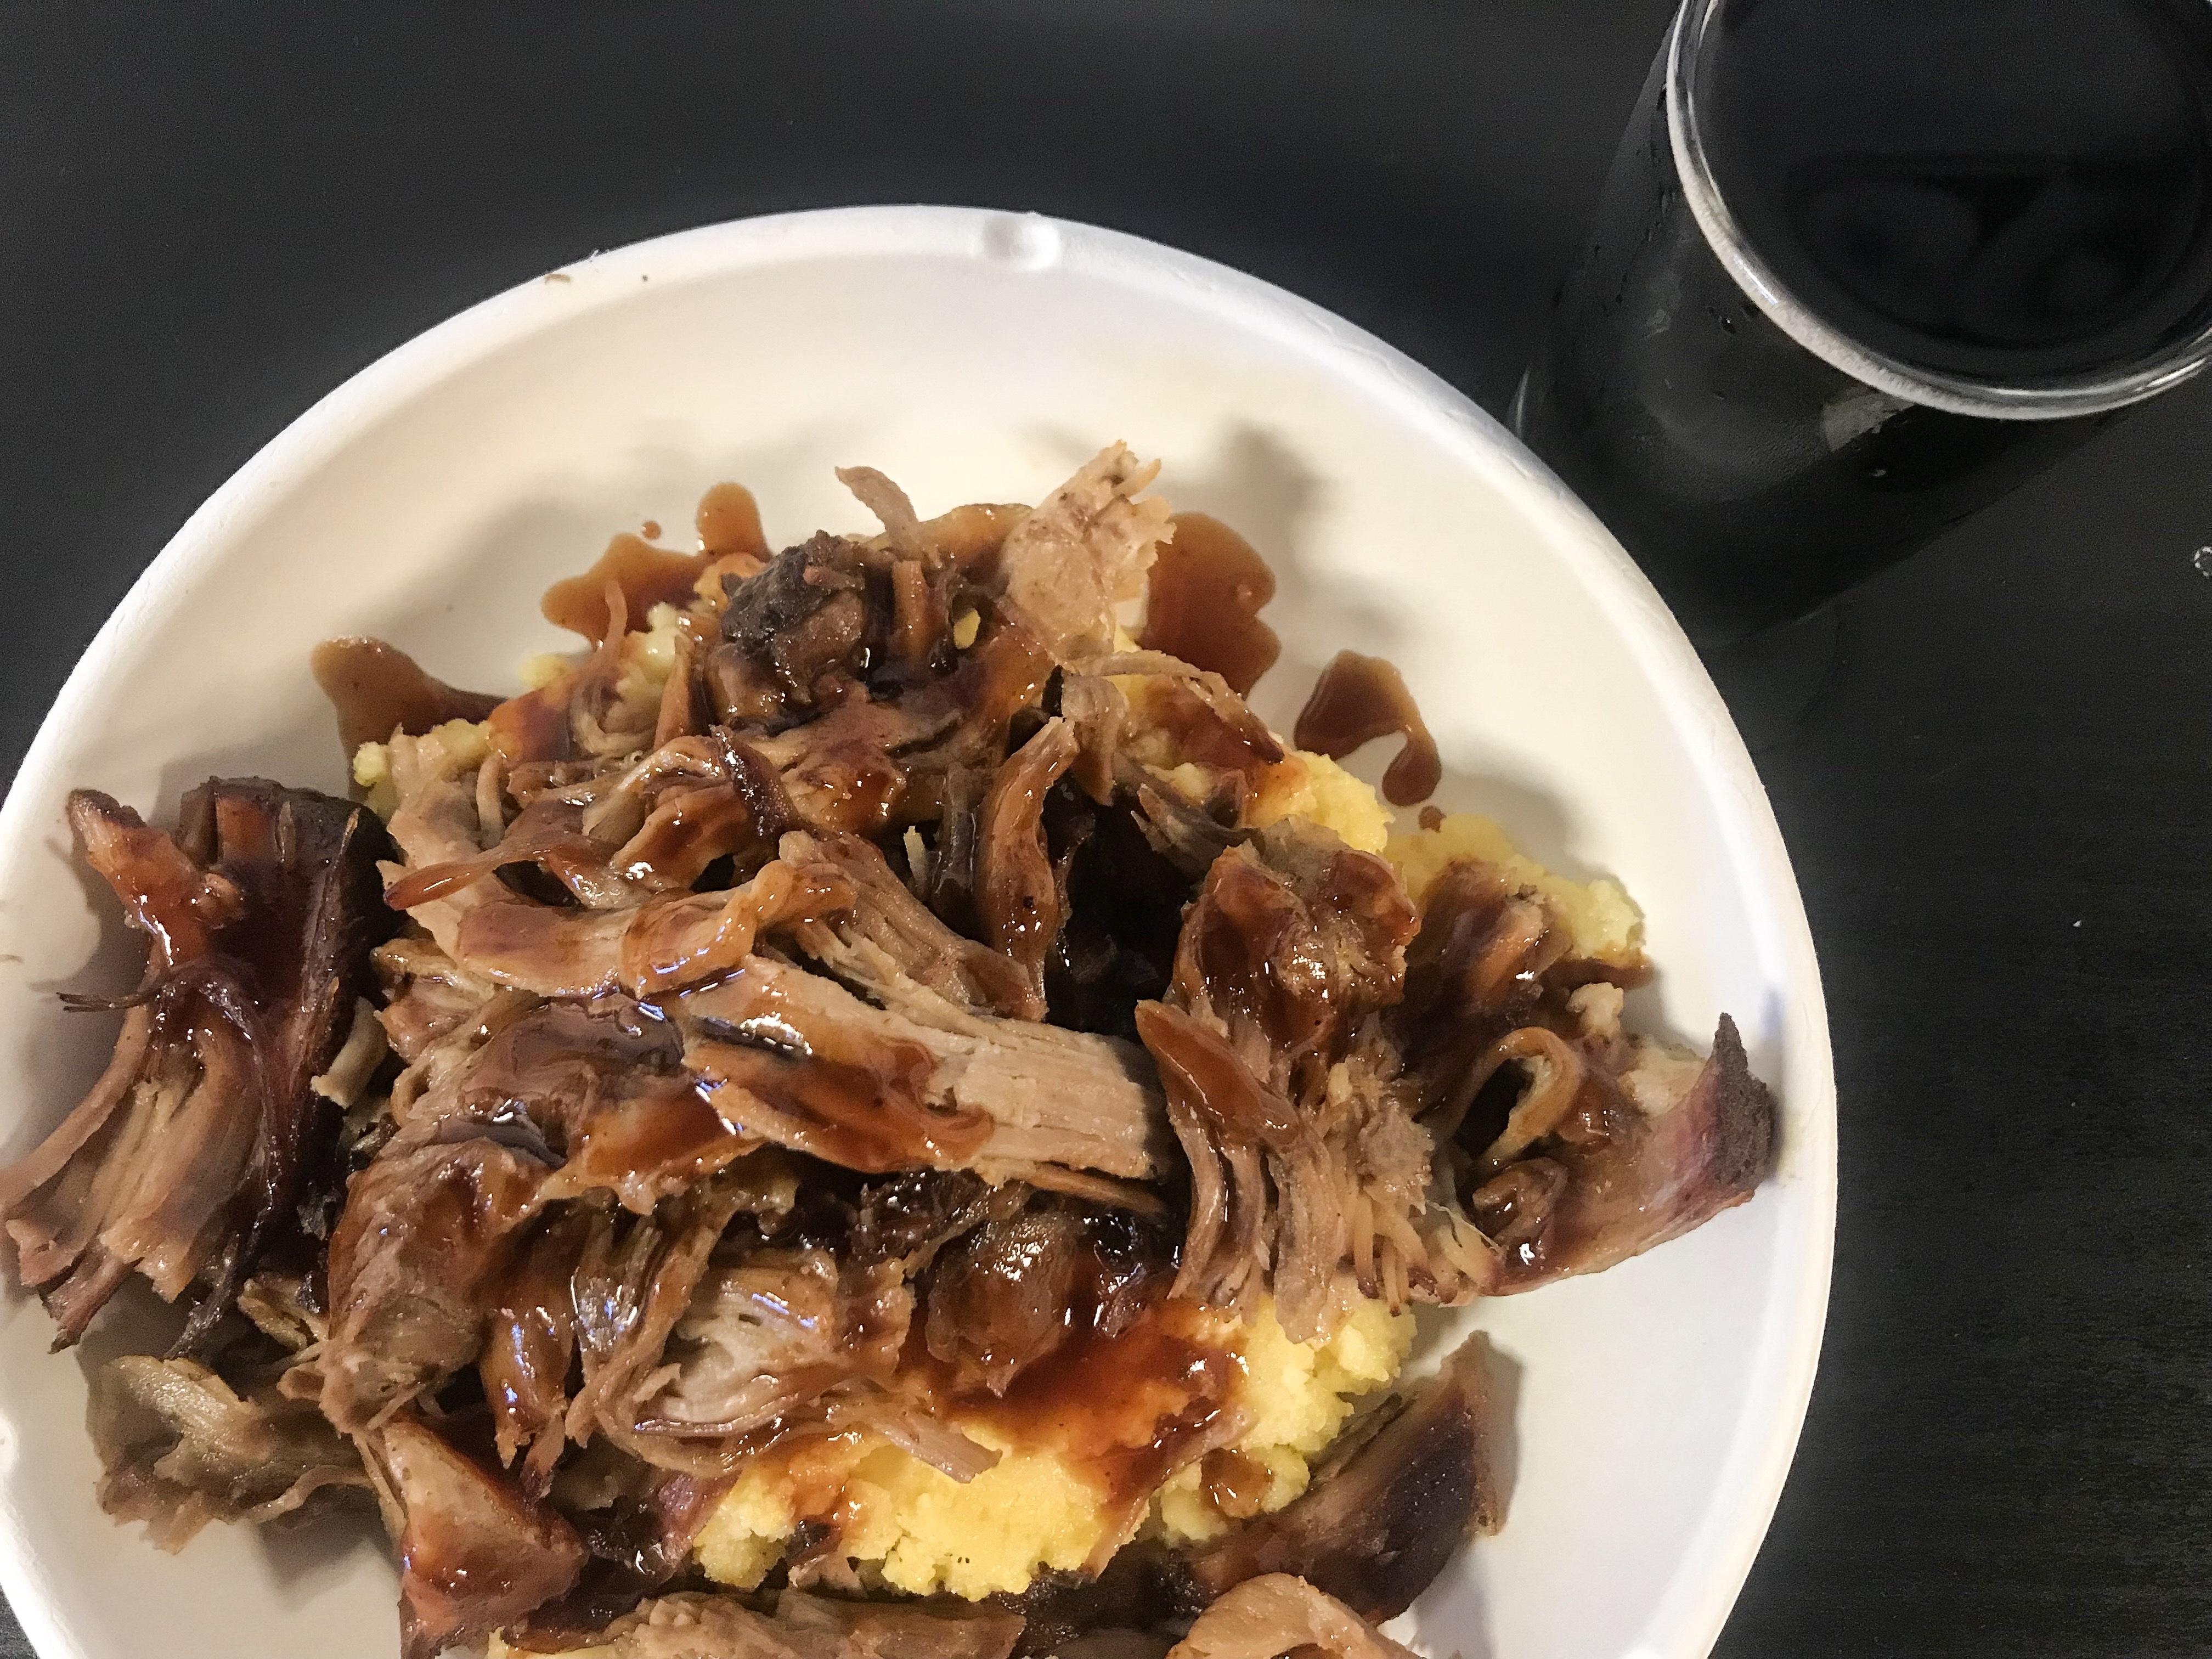 Pulled Pork with Stout BBQ sauce served with creamy polenta and Stern Line Stout